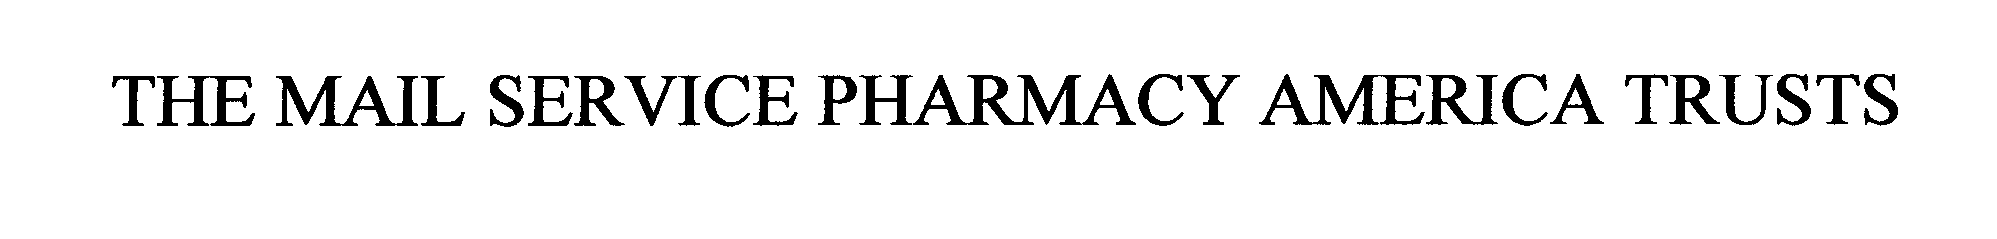  THE MAIL SERVICE PHARMACY AMERICA TRUSTS